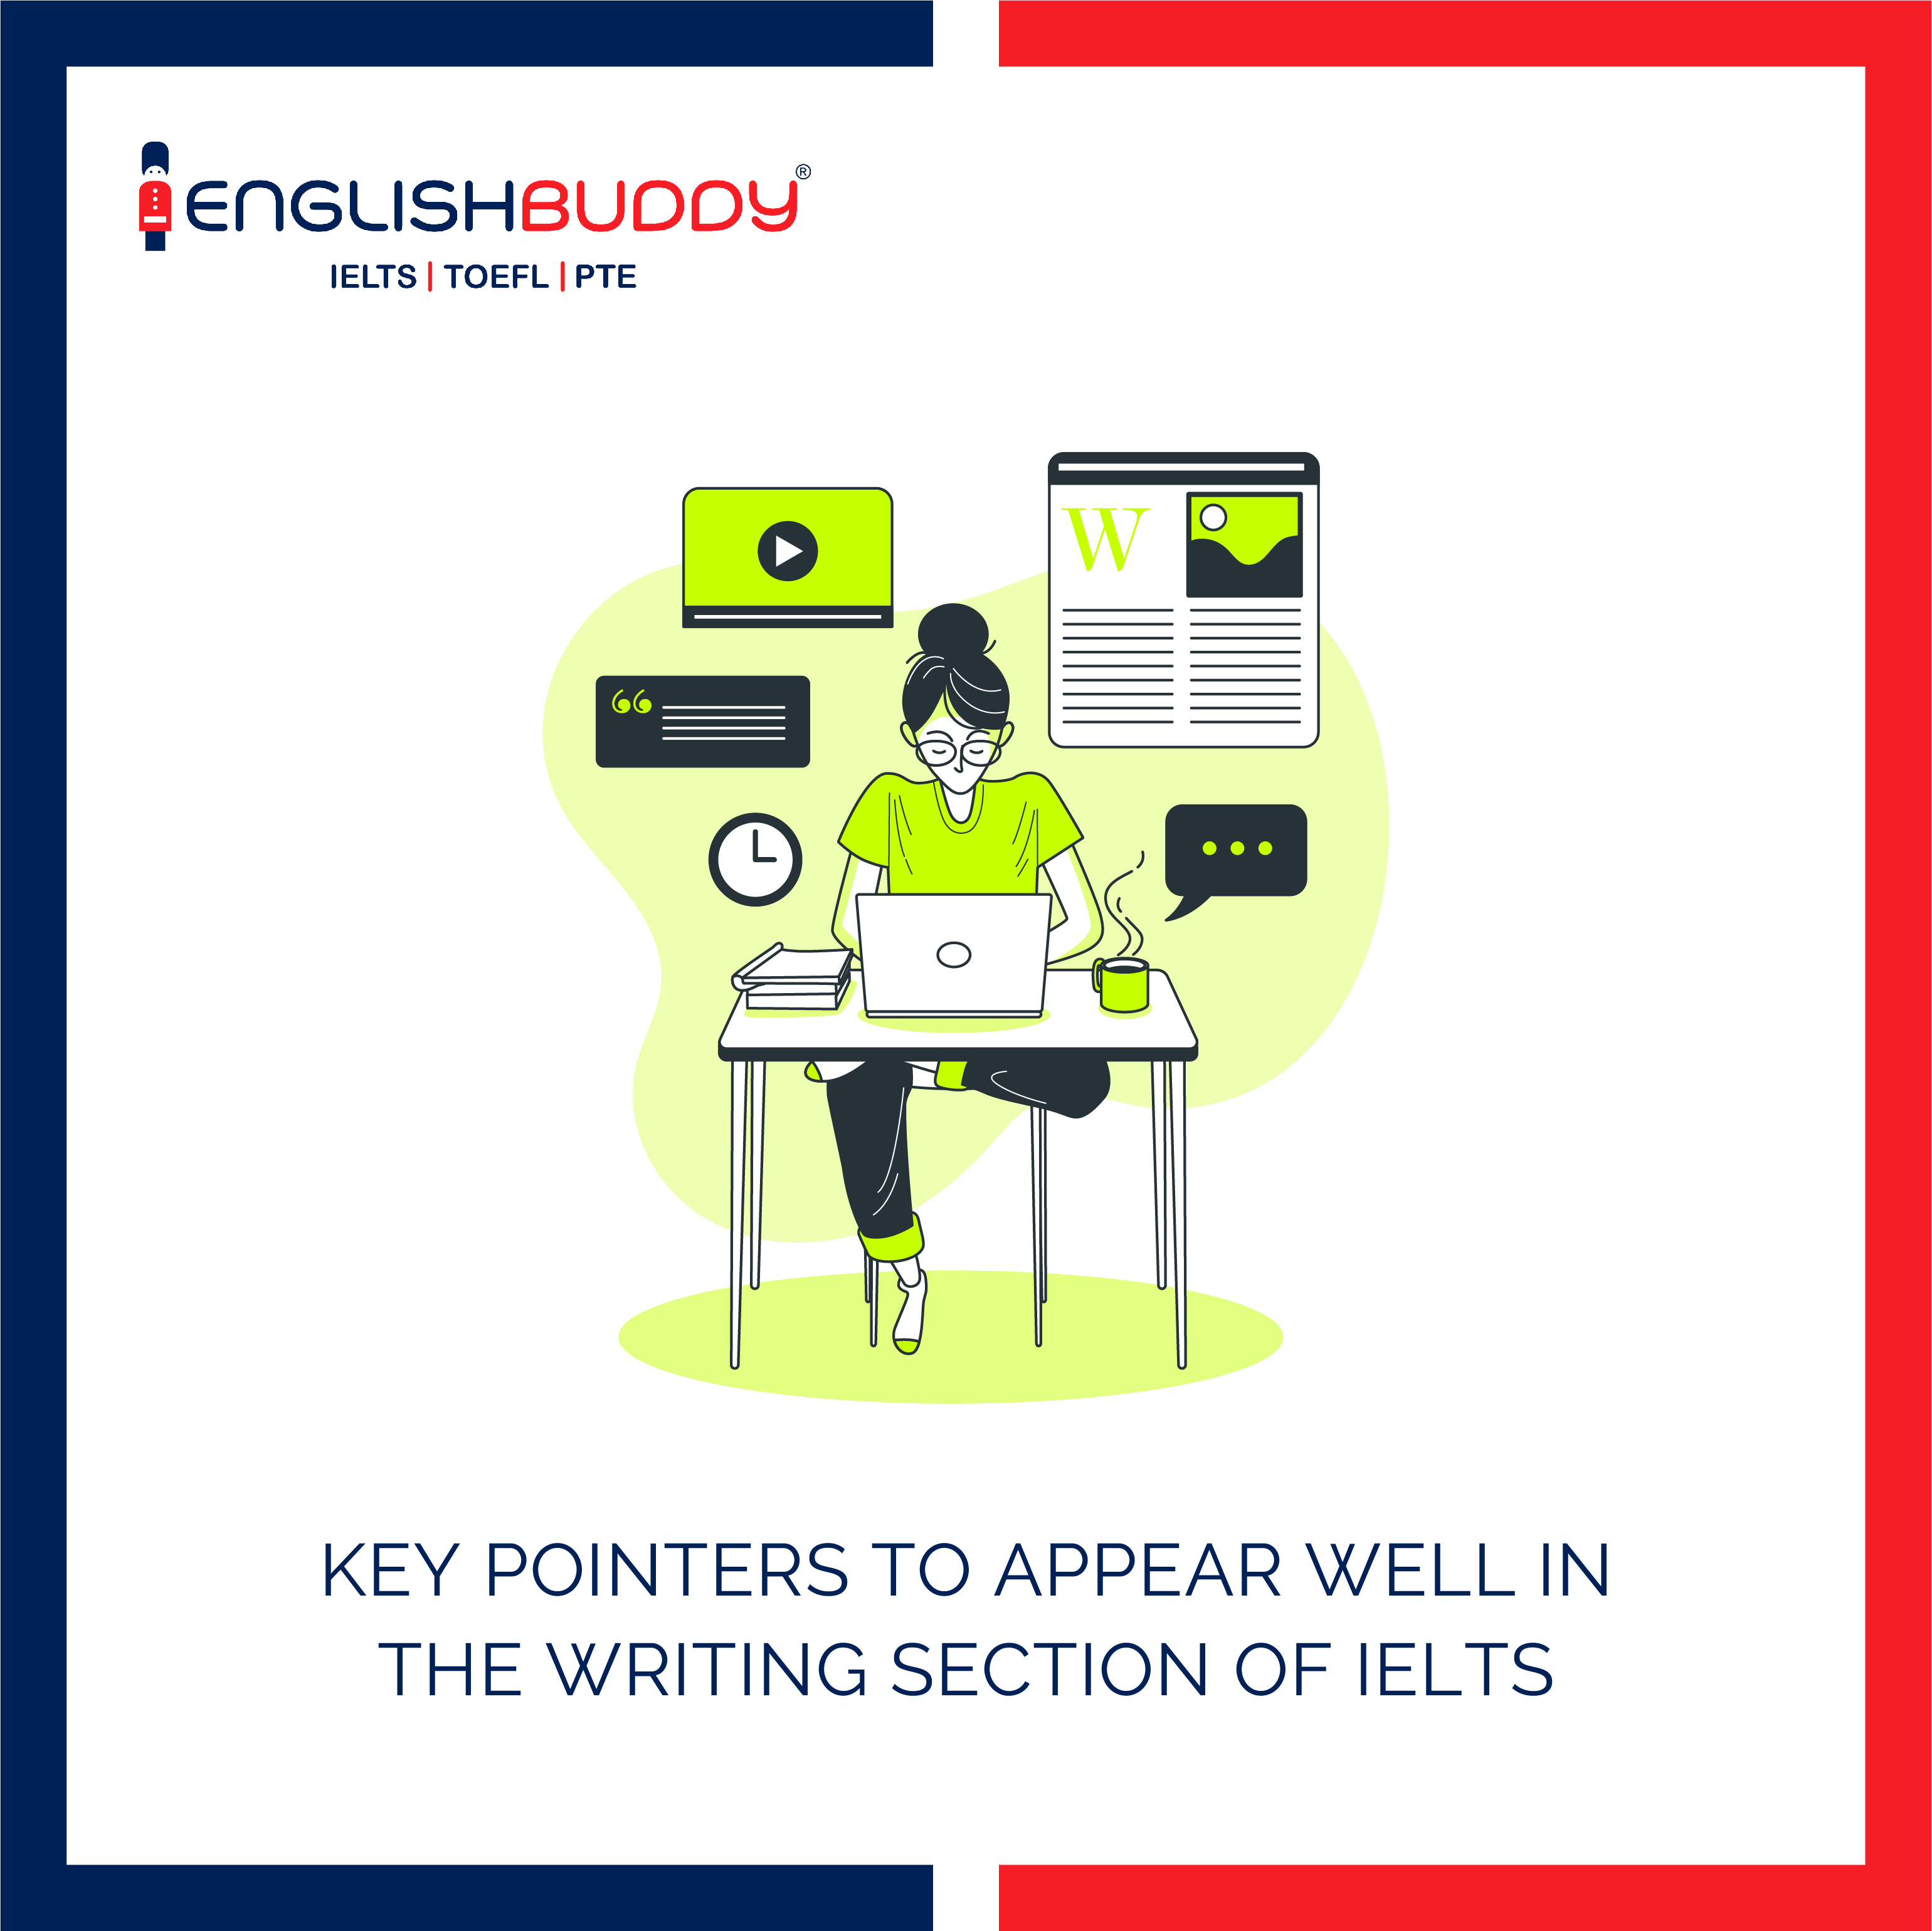 A rational approach to ace your IELTS exam